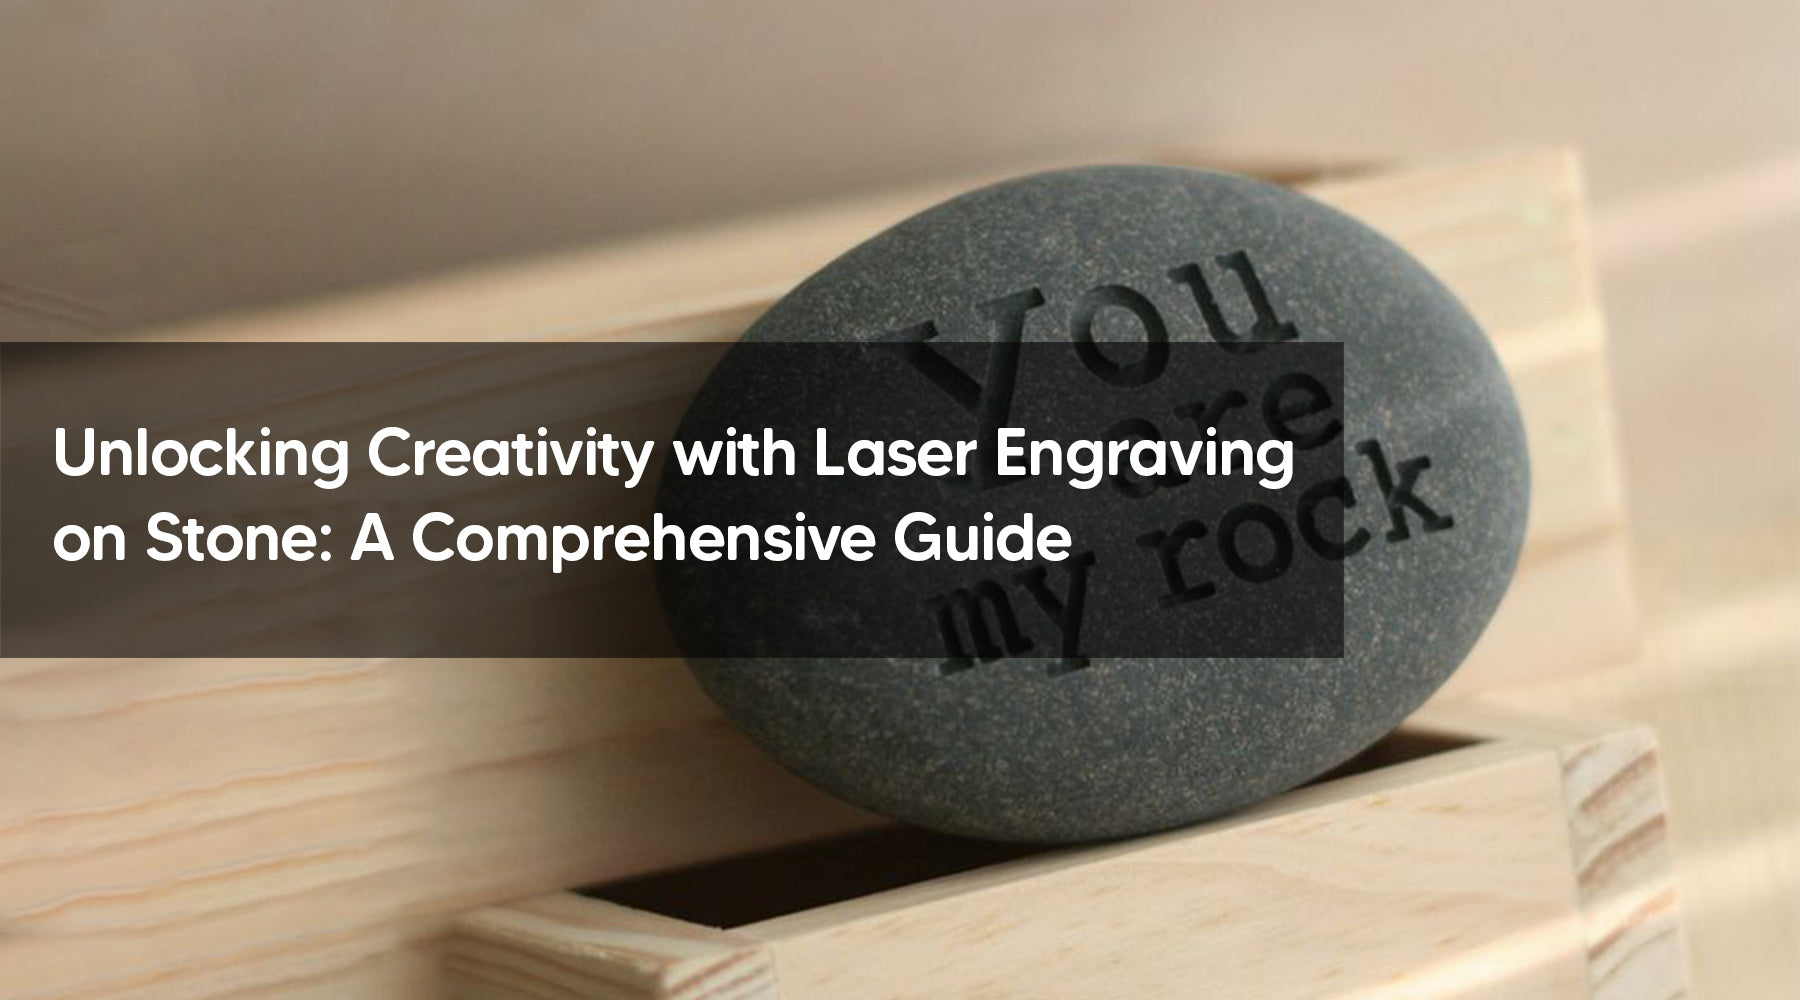 Unlocking Creativity with Laser Engraving on Stone: A Comprehensive Guide